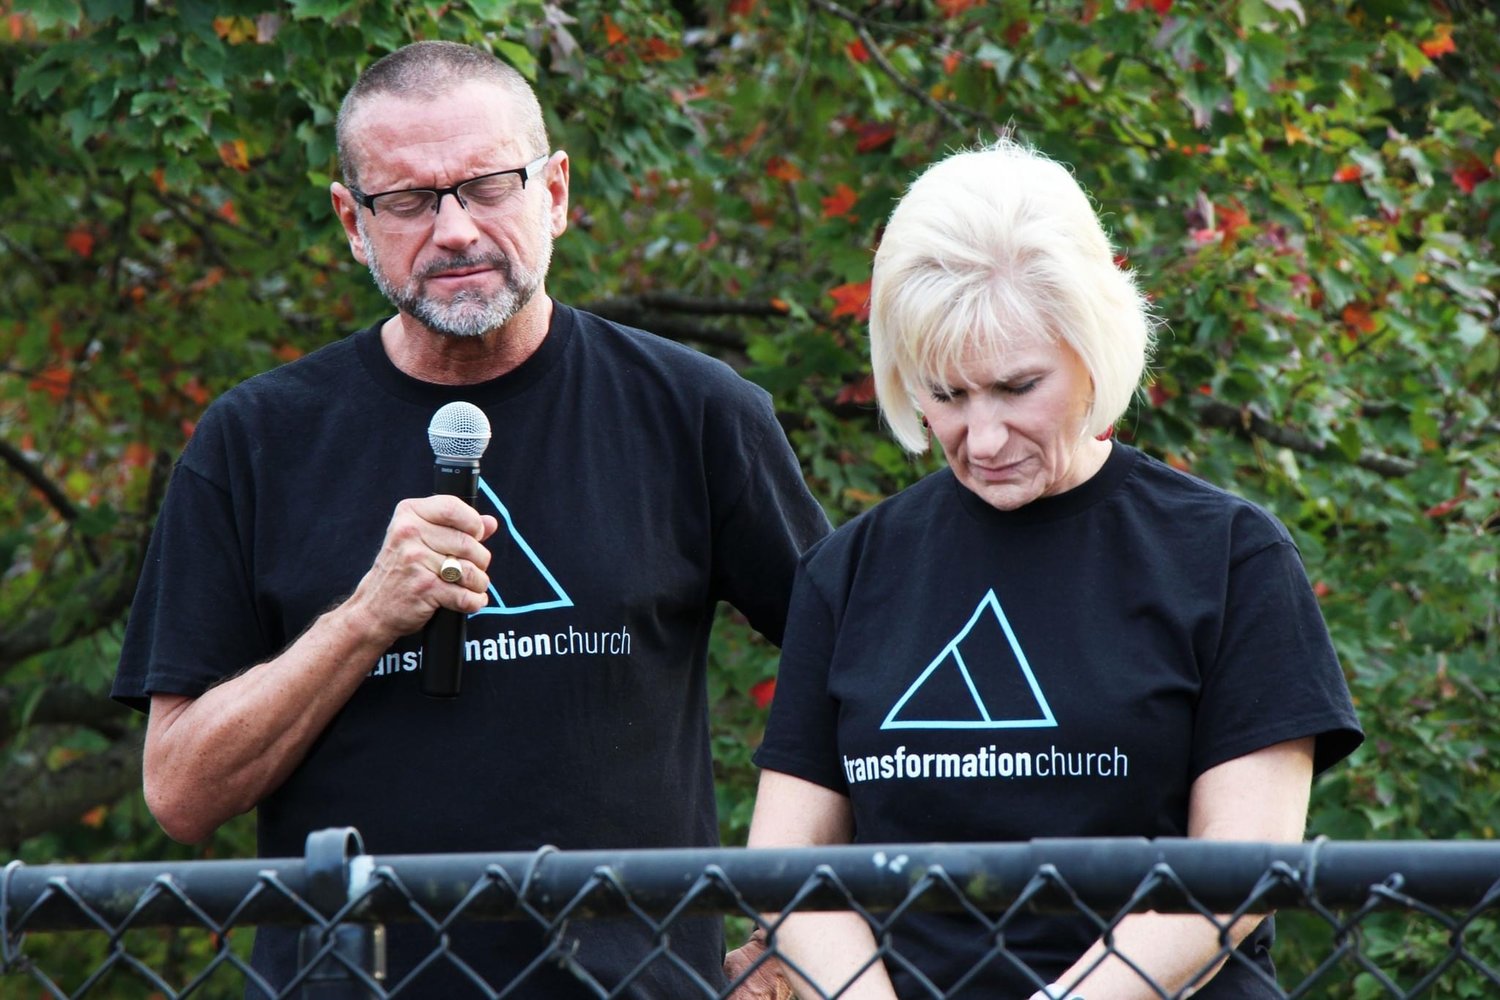 Mike and Julie Dorough have prayed fervently for God to bless their efforts in planting Transformation Church.